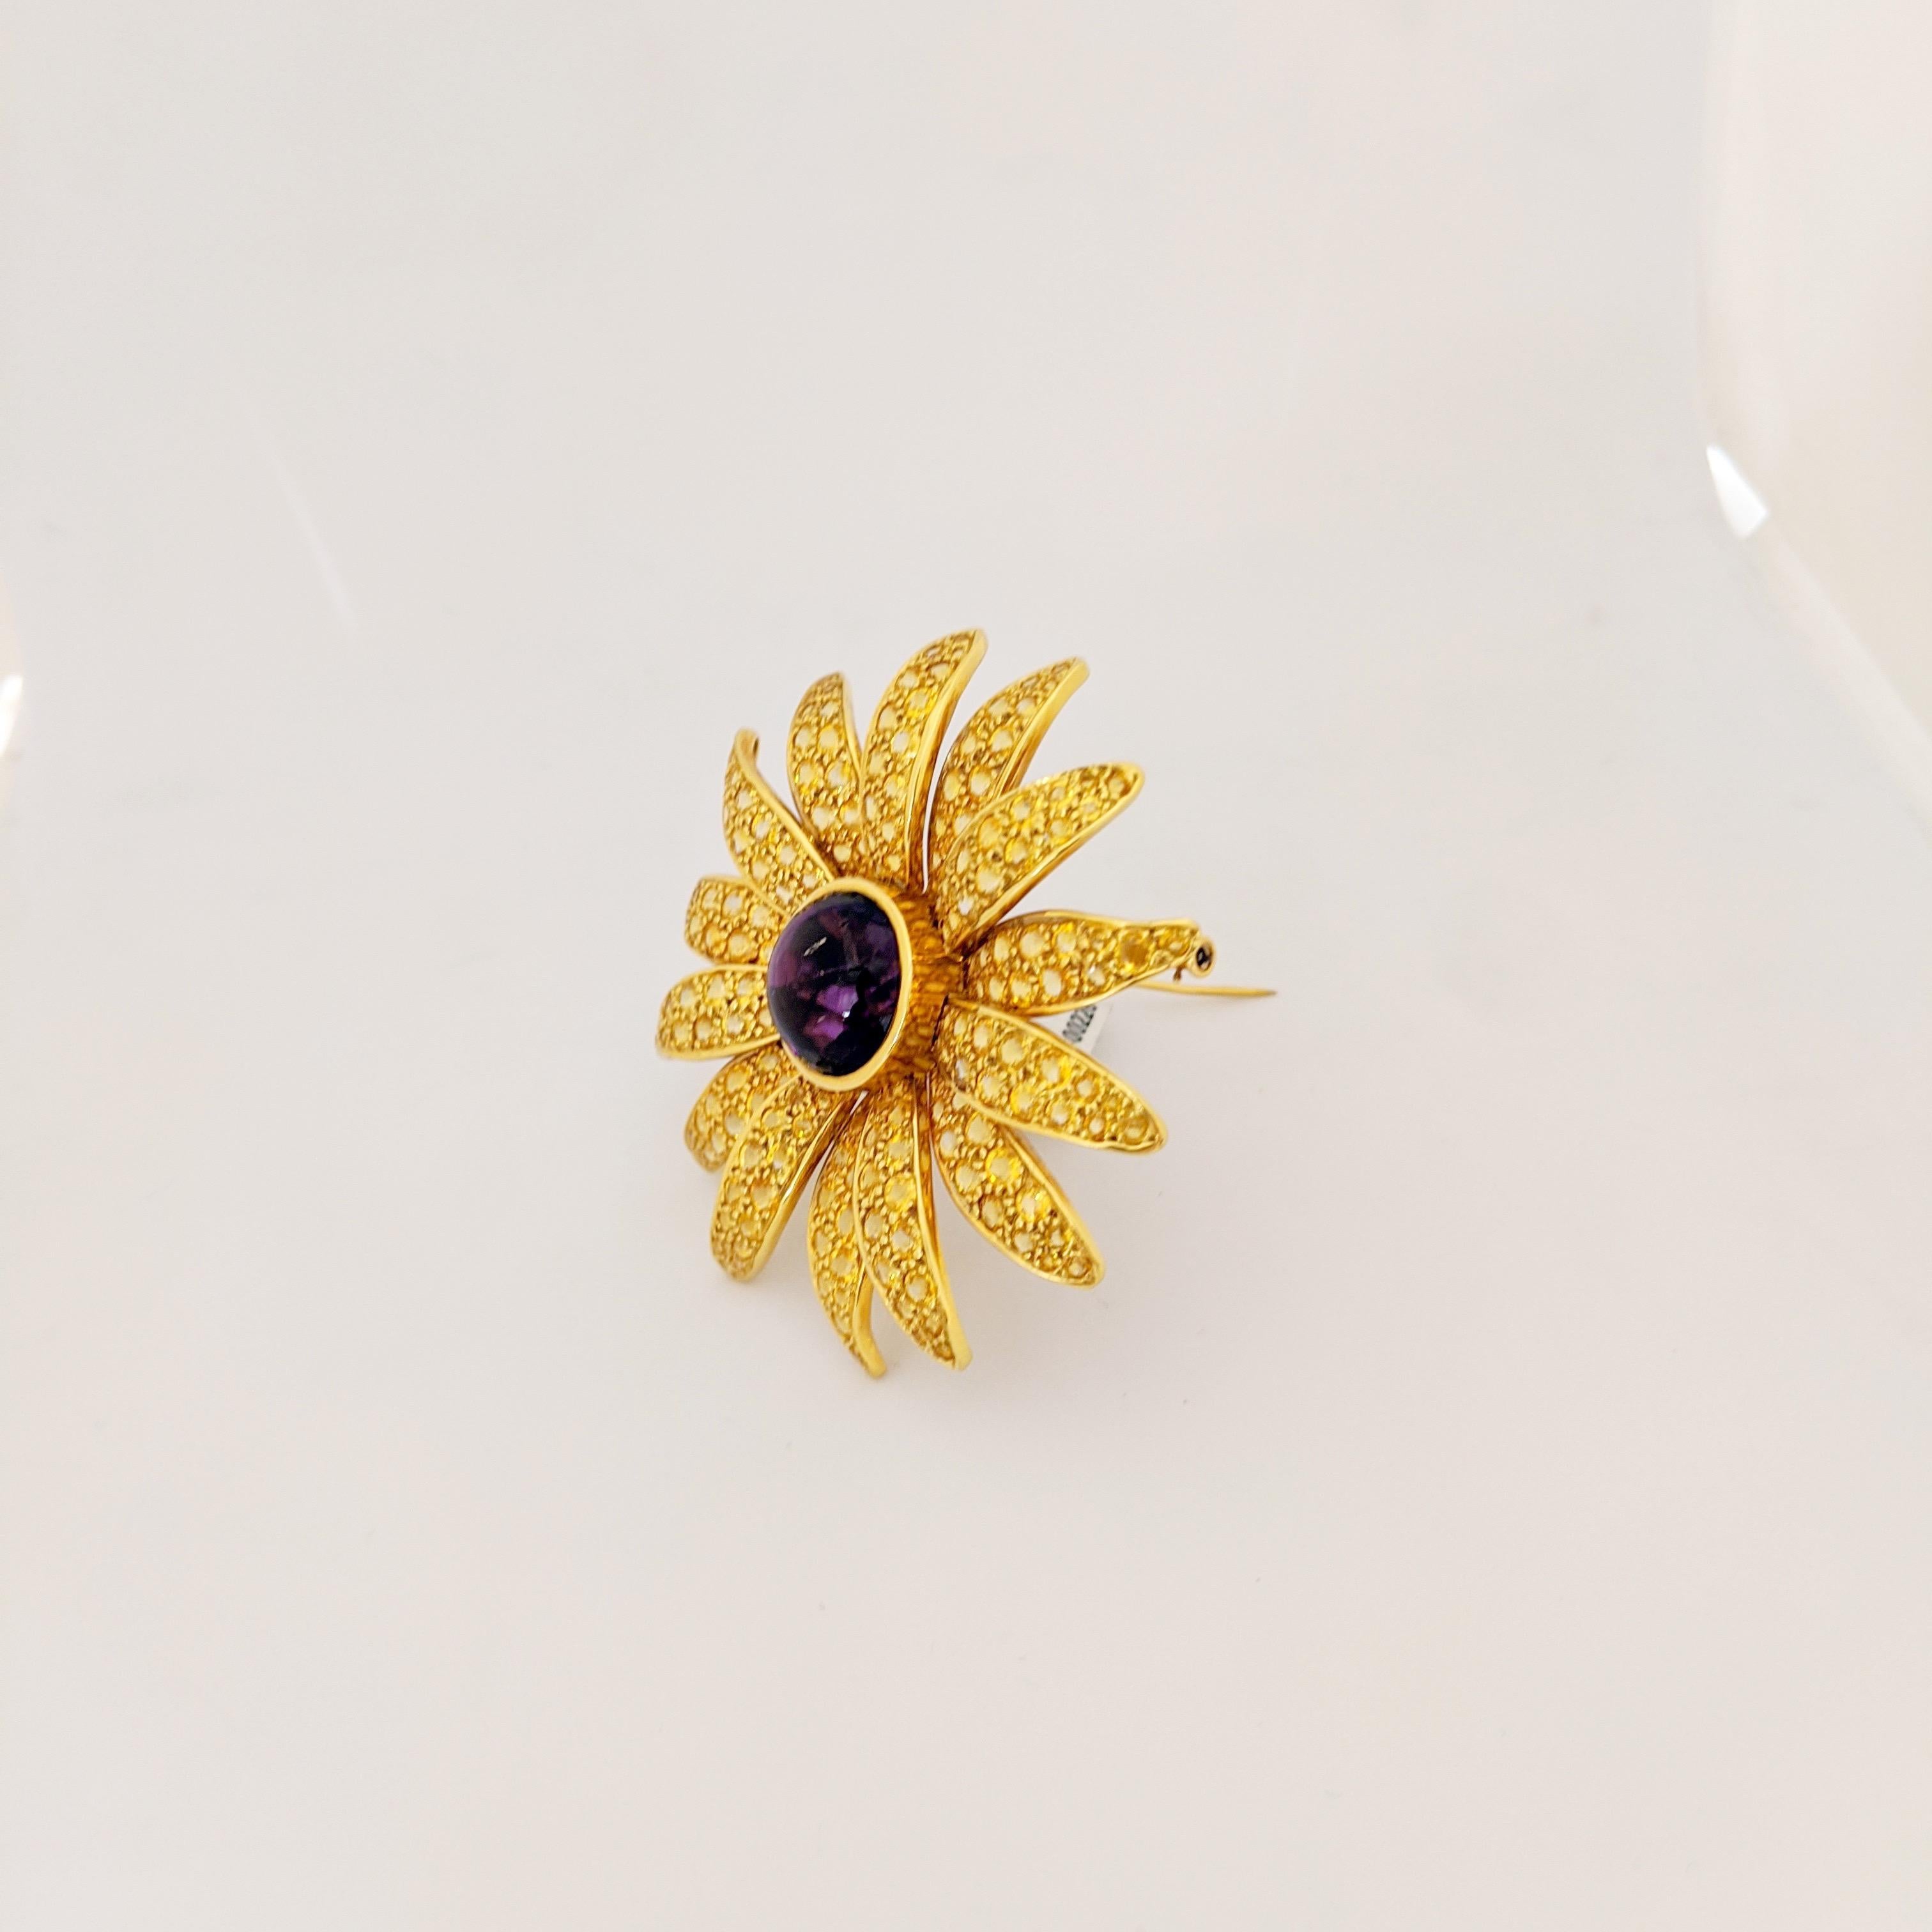 Contemporary 18kt Gold Sunflower Brooch, 20.24ct Yellow Sapphires and 15.58 Carat Amethyst